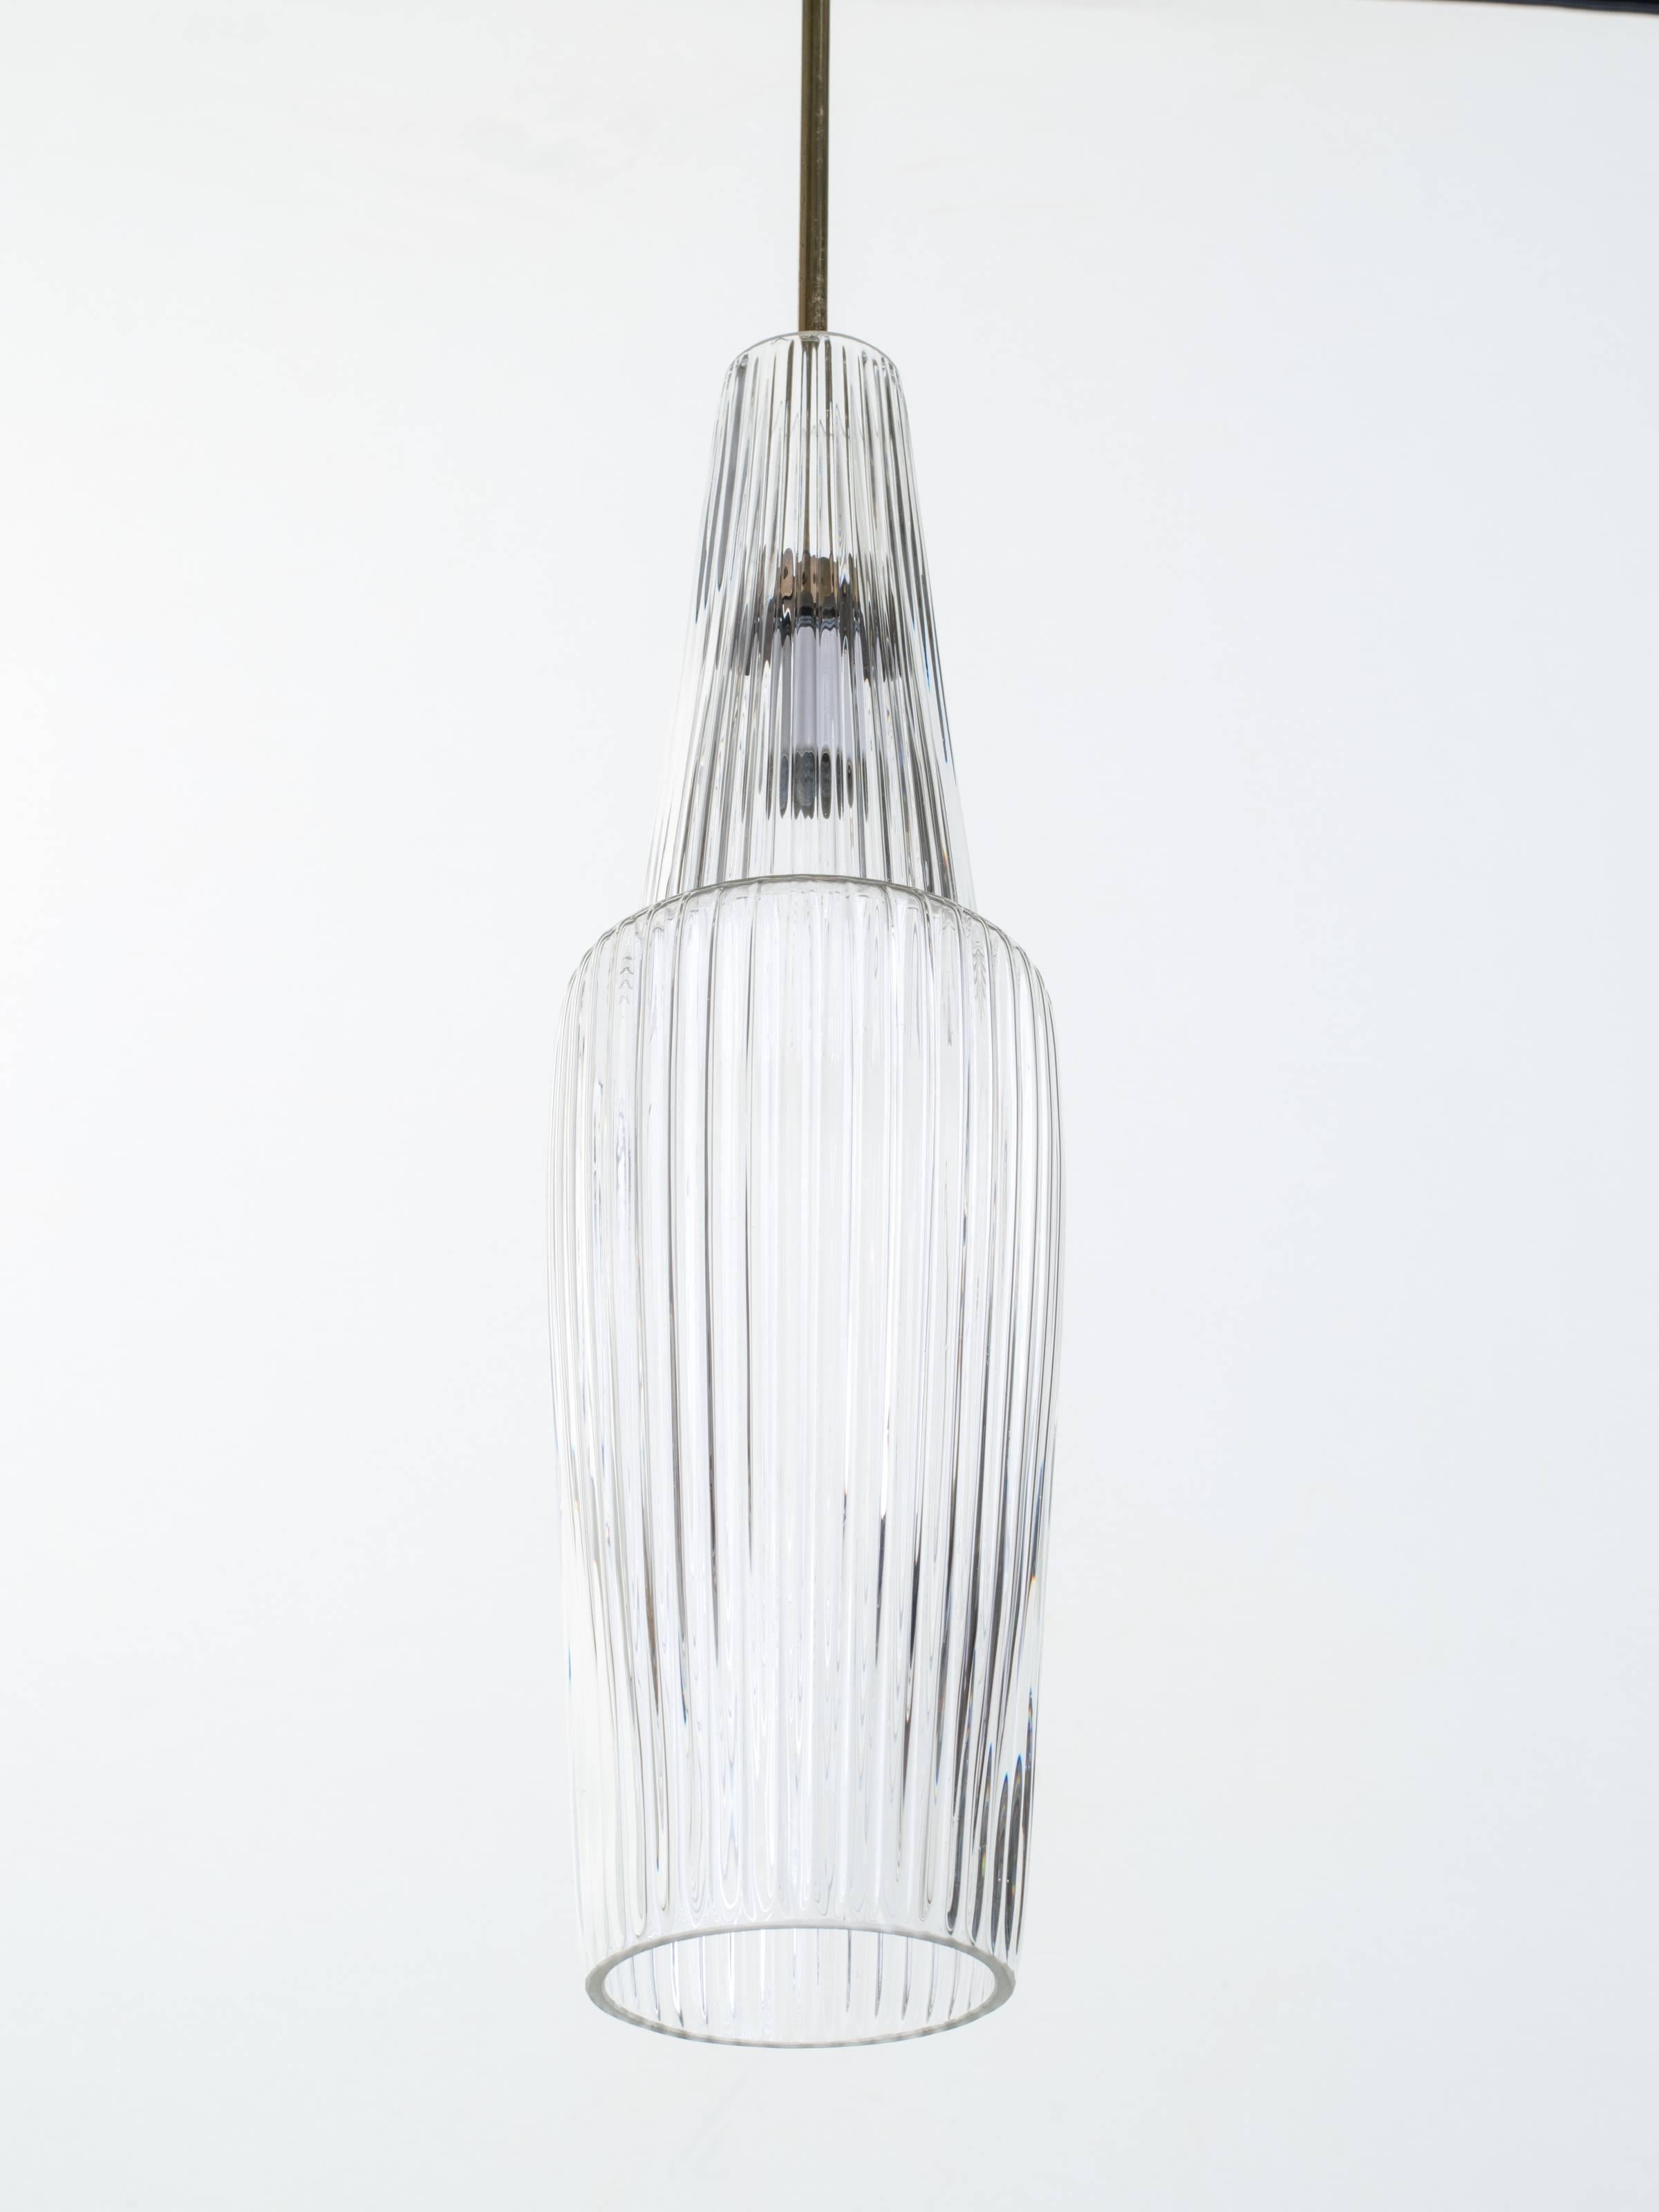 Swedish chandelier pendants with brass hardware.
Newly wired.
41 in H to the canopy
19.25 in H only the glass portion.